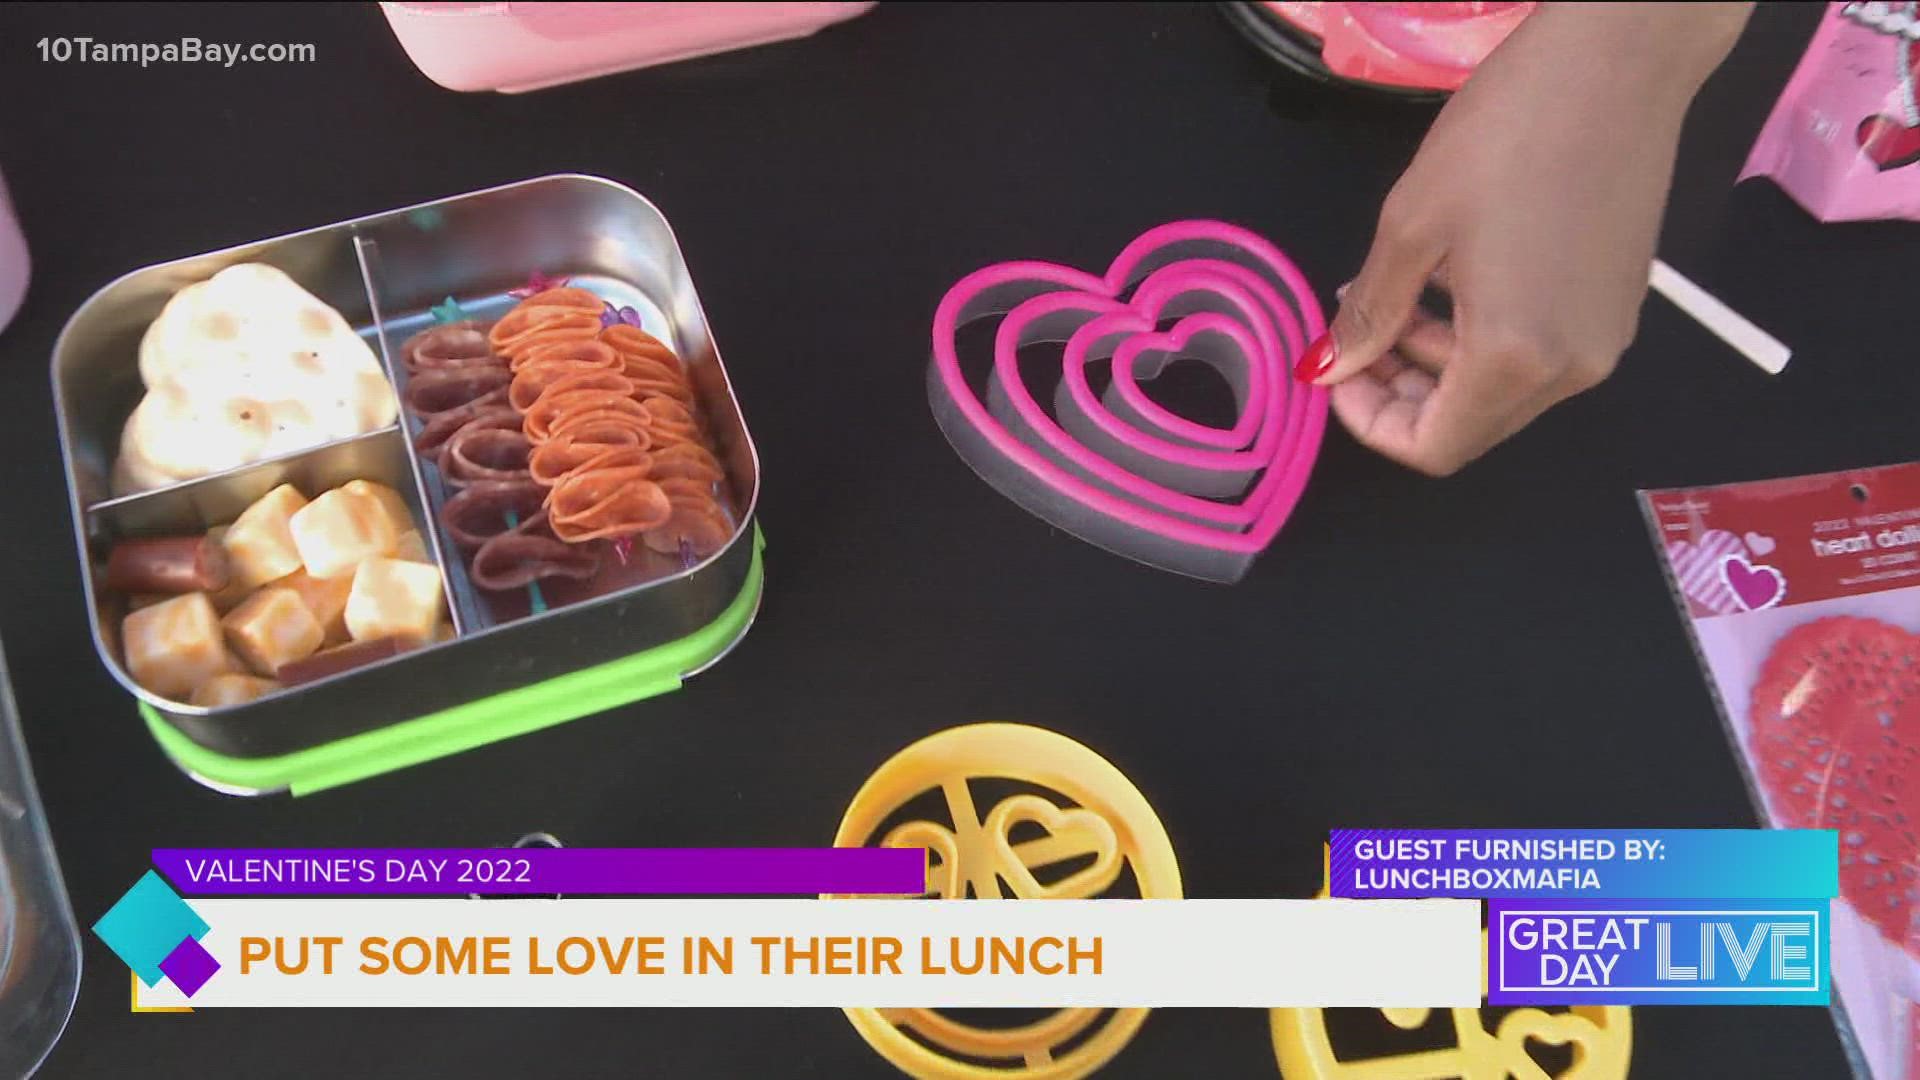 The Lunchbox Mafia shares fun Valentine’s snack ideas for your kiddos